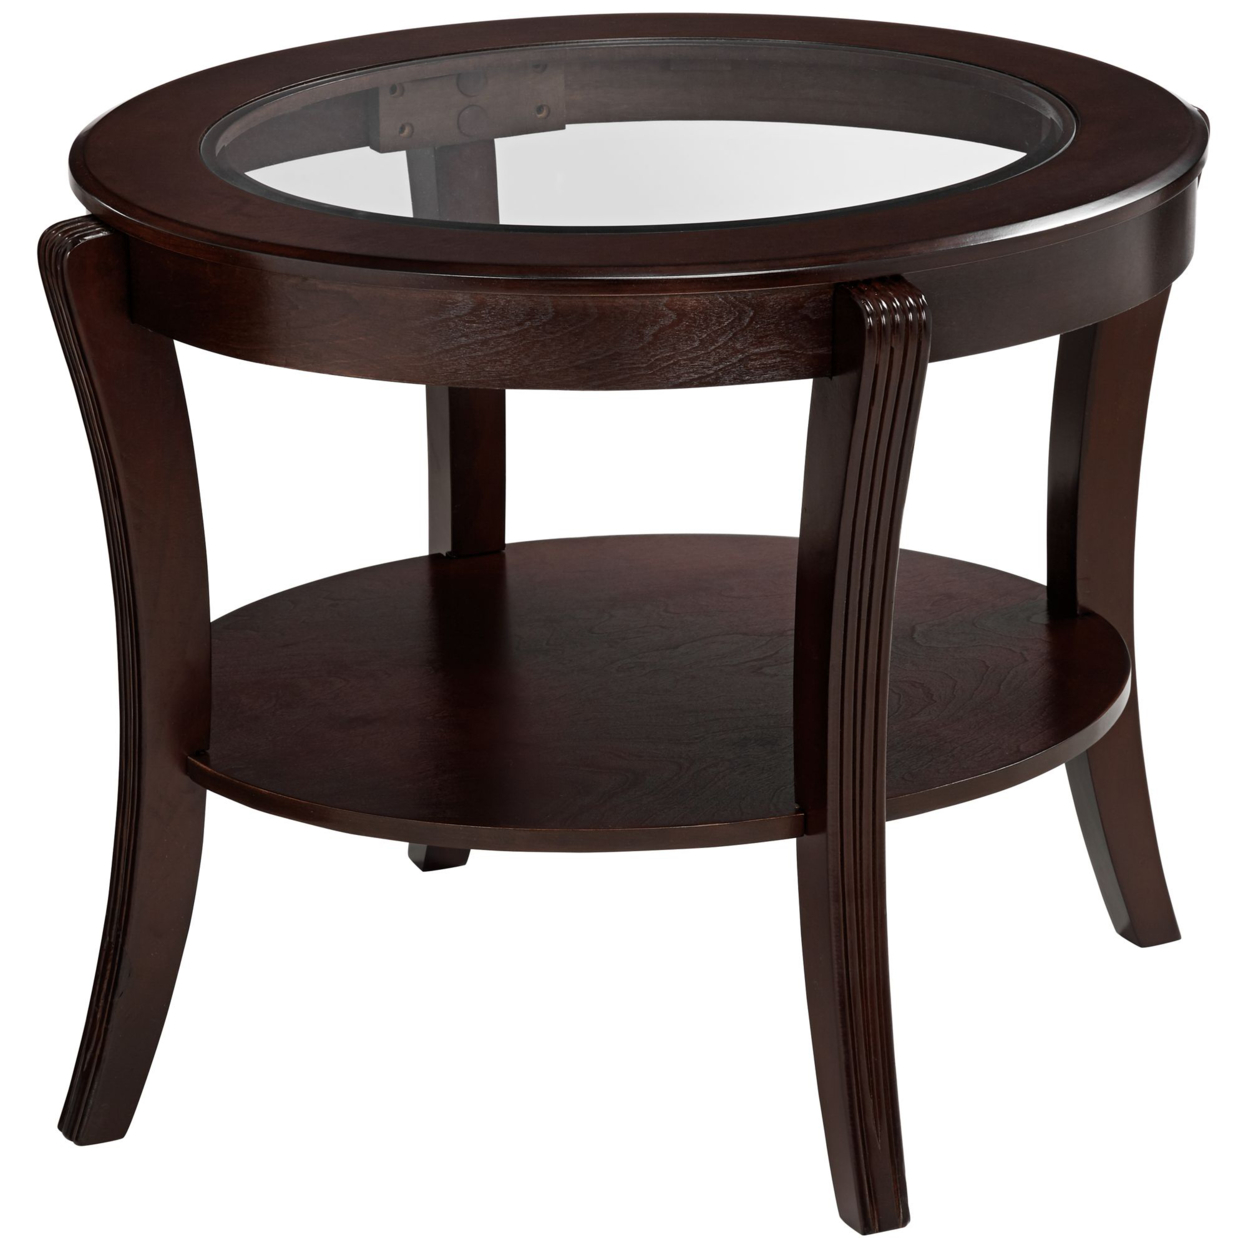 Oval Top Wooden End Table With Glass Insert And Open Shelf, Espresso Brown- Saltoro Sherpi